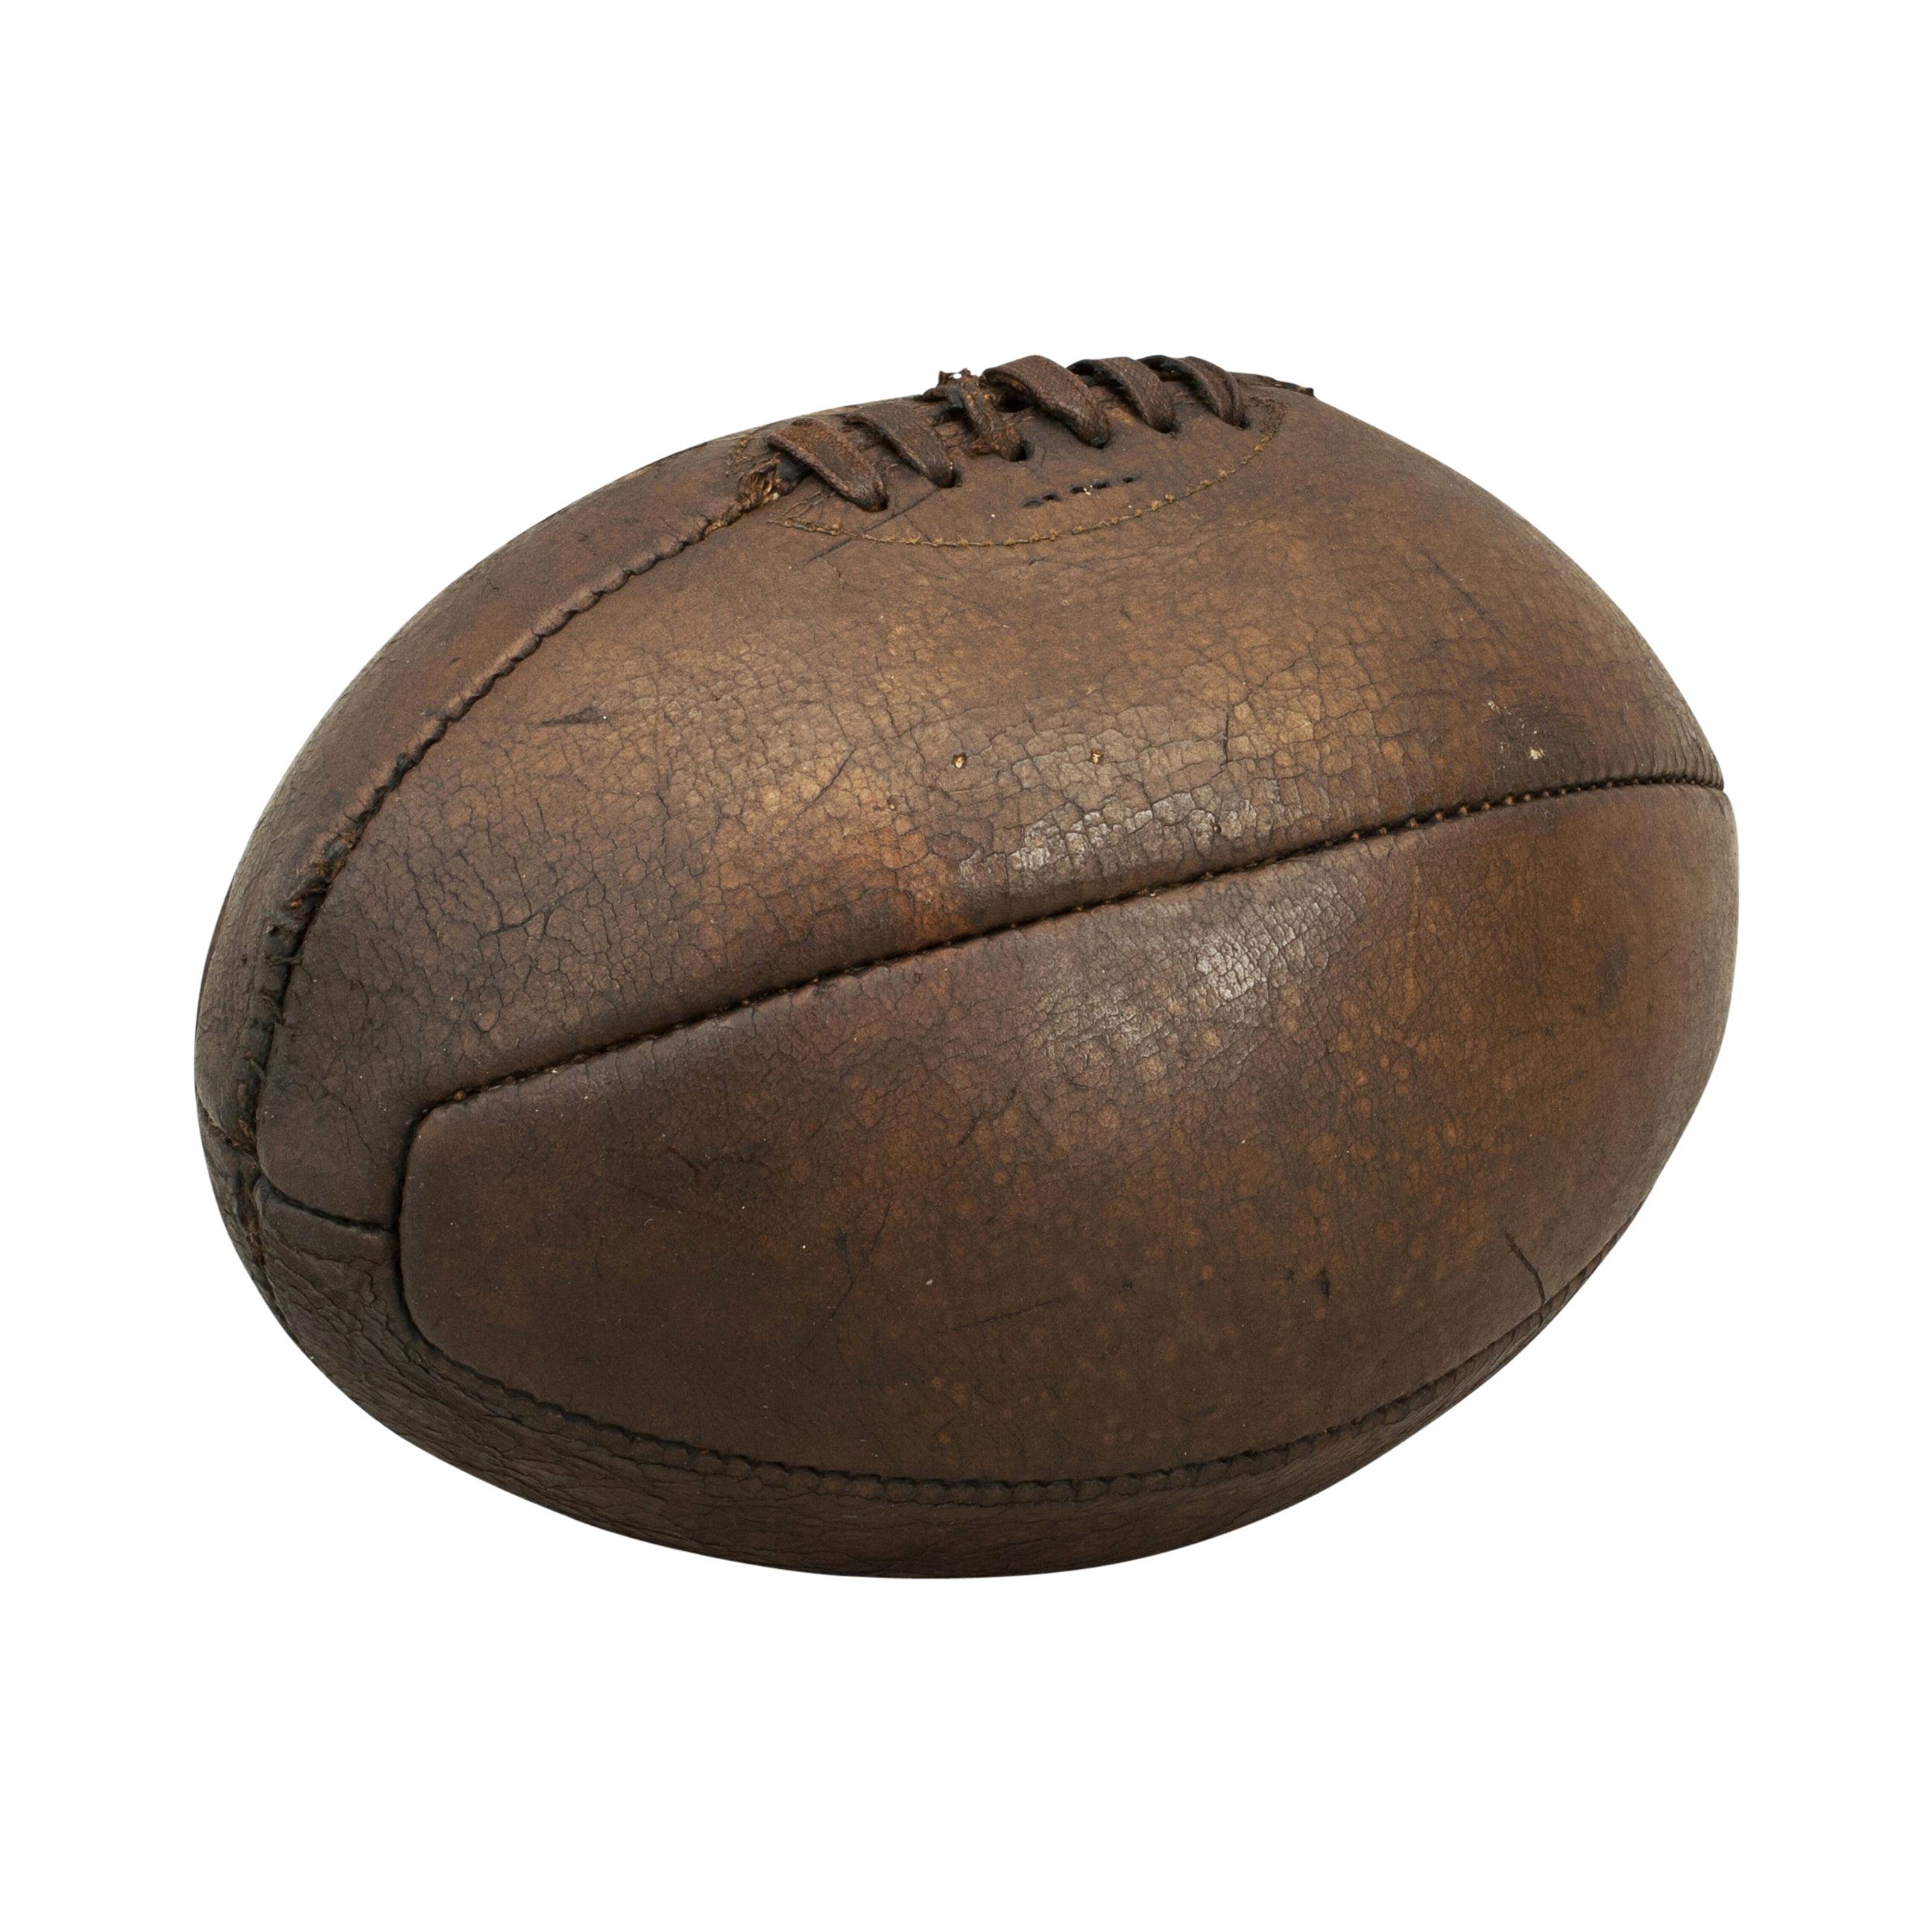 Brand New Vintage Leather Rugby Ball size 5 Retro style Antique Look VRB01 